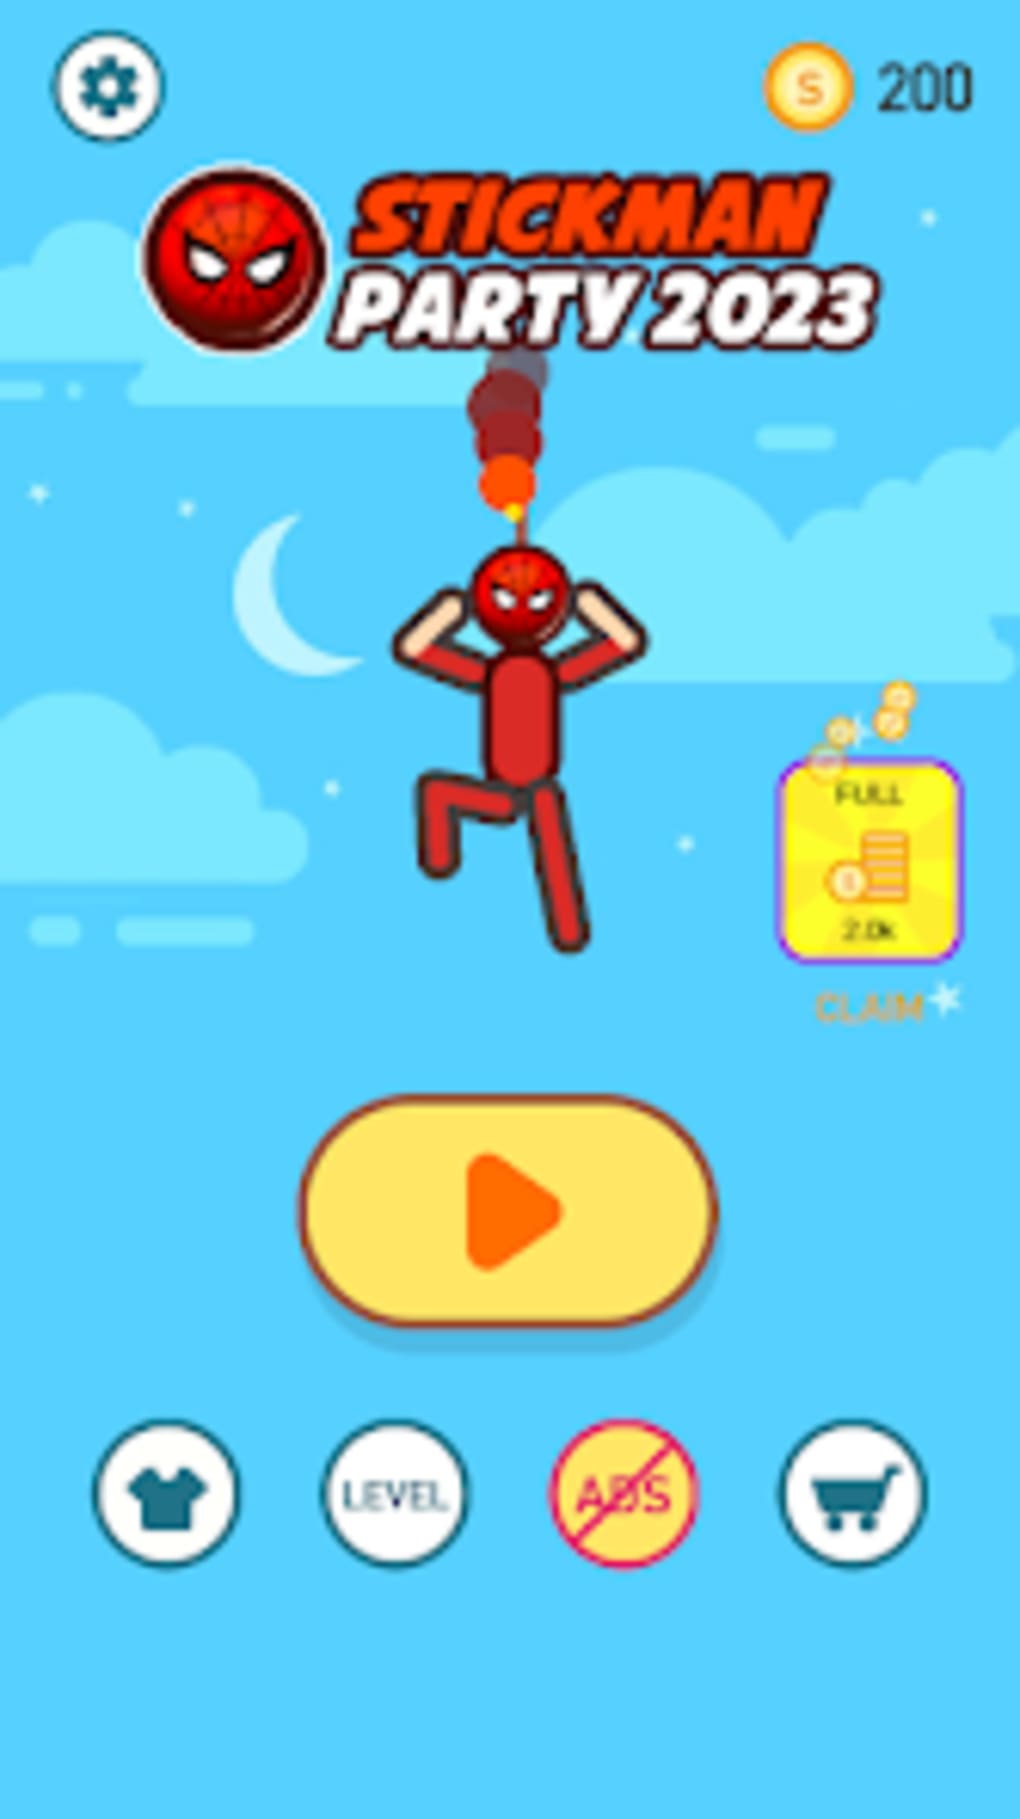 App Stickman Party Guide Android app 2020 